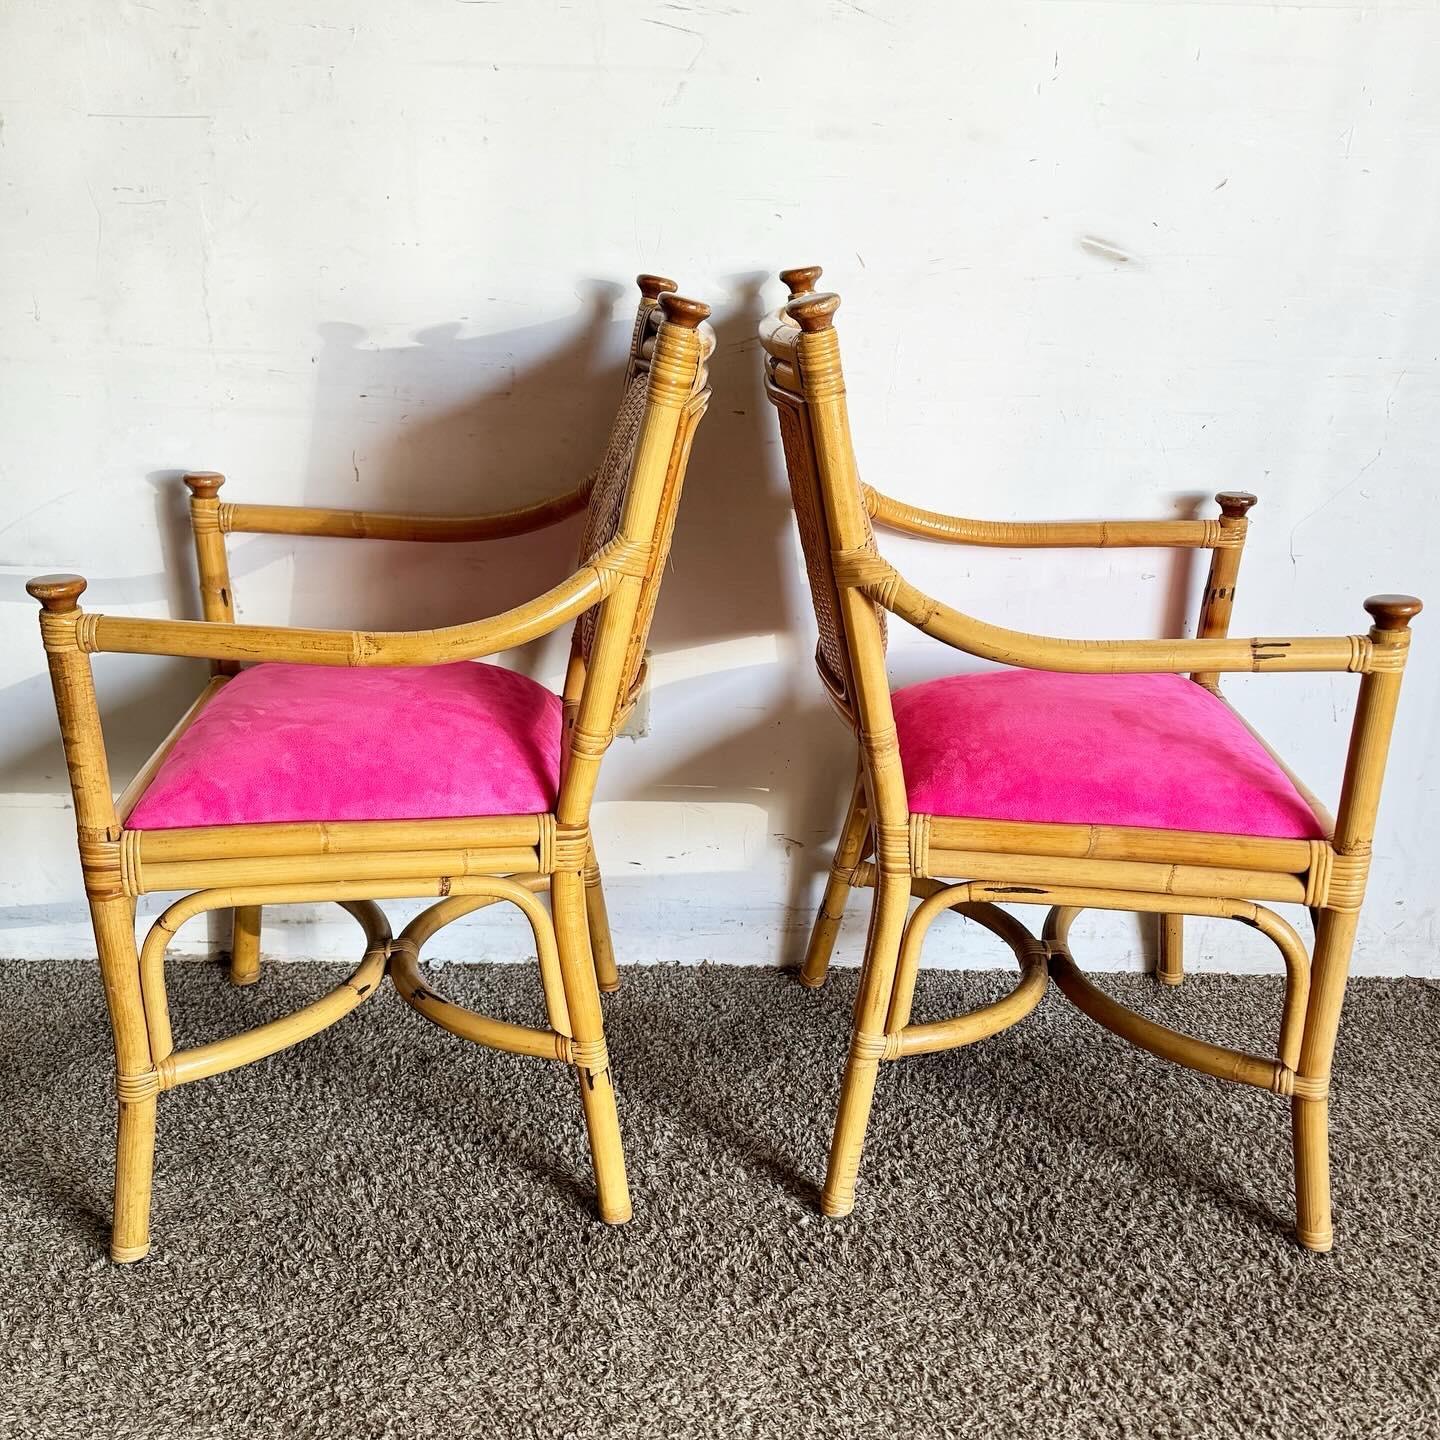 Late 20th Century Boho Chic Wicker Rattan Bamboo Dining Arm Chairs With Hot Pink Cushions For Sale